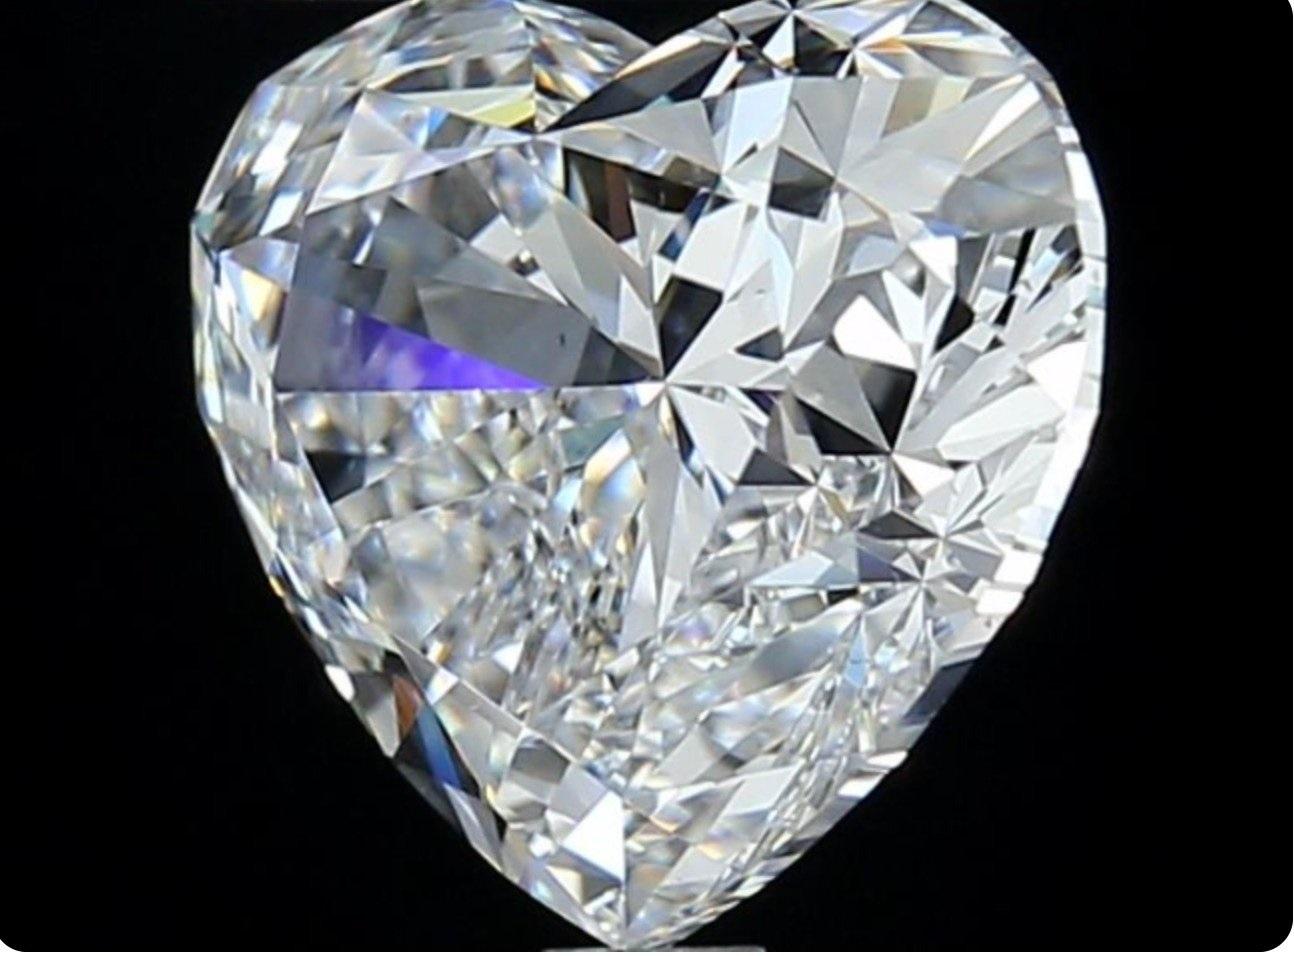 Ideal cut and Beautiful rare cutted  heart Diamond in a 4.01 carat t with the Highest color D with a Gia certificate and laser inscription number.

GIA 5211642838

Sku J-657